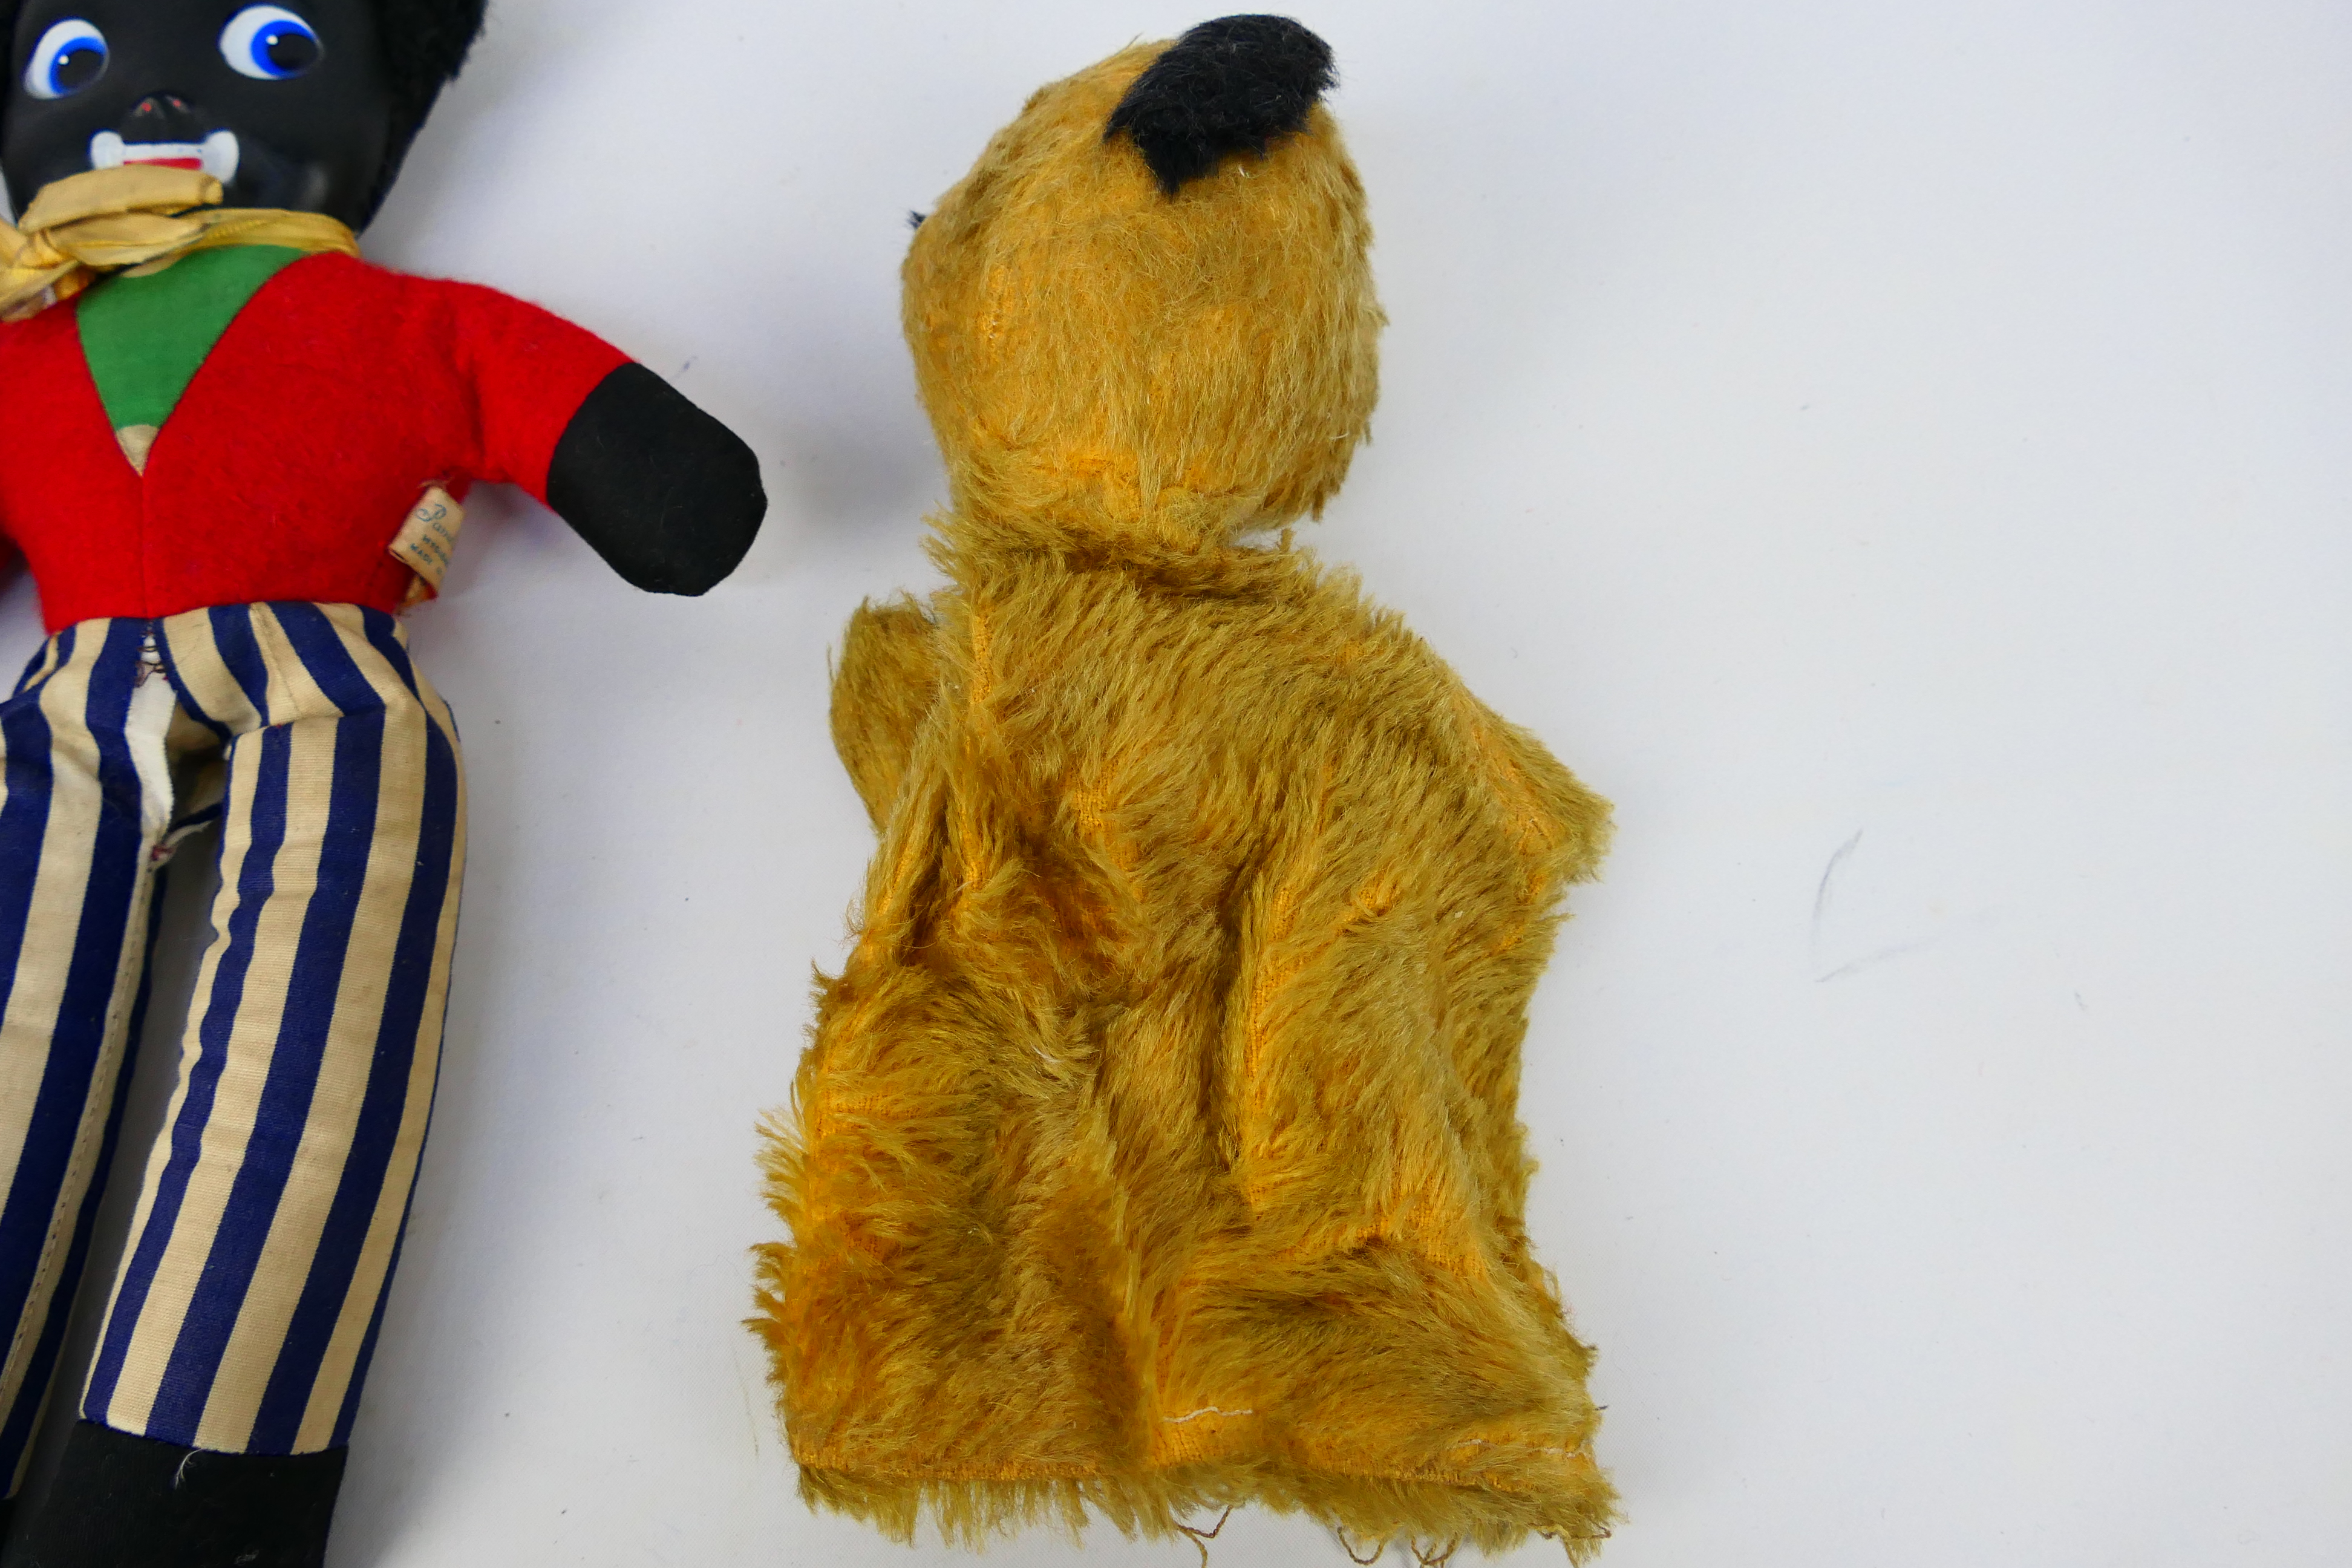 Pamela Foster - Chad Valley - Sooty - An unboxed Sooty Puppet, Golly and Bunny Plush. - Image 4 of 8